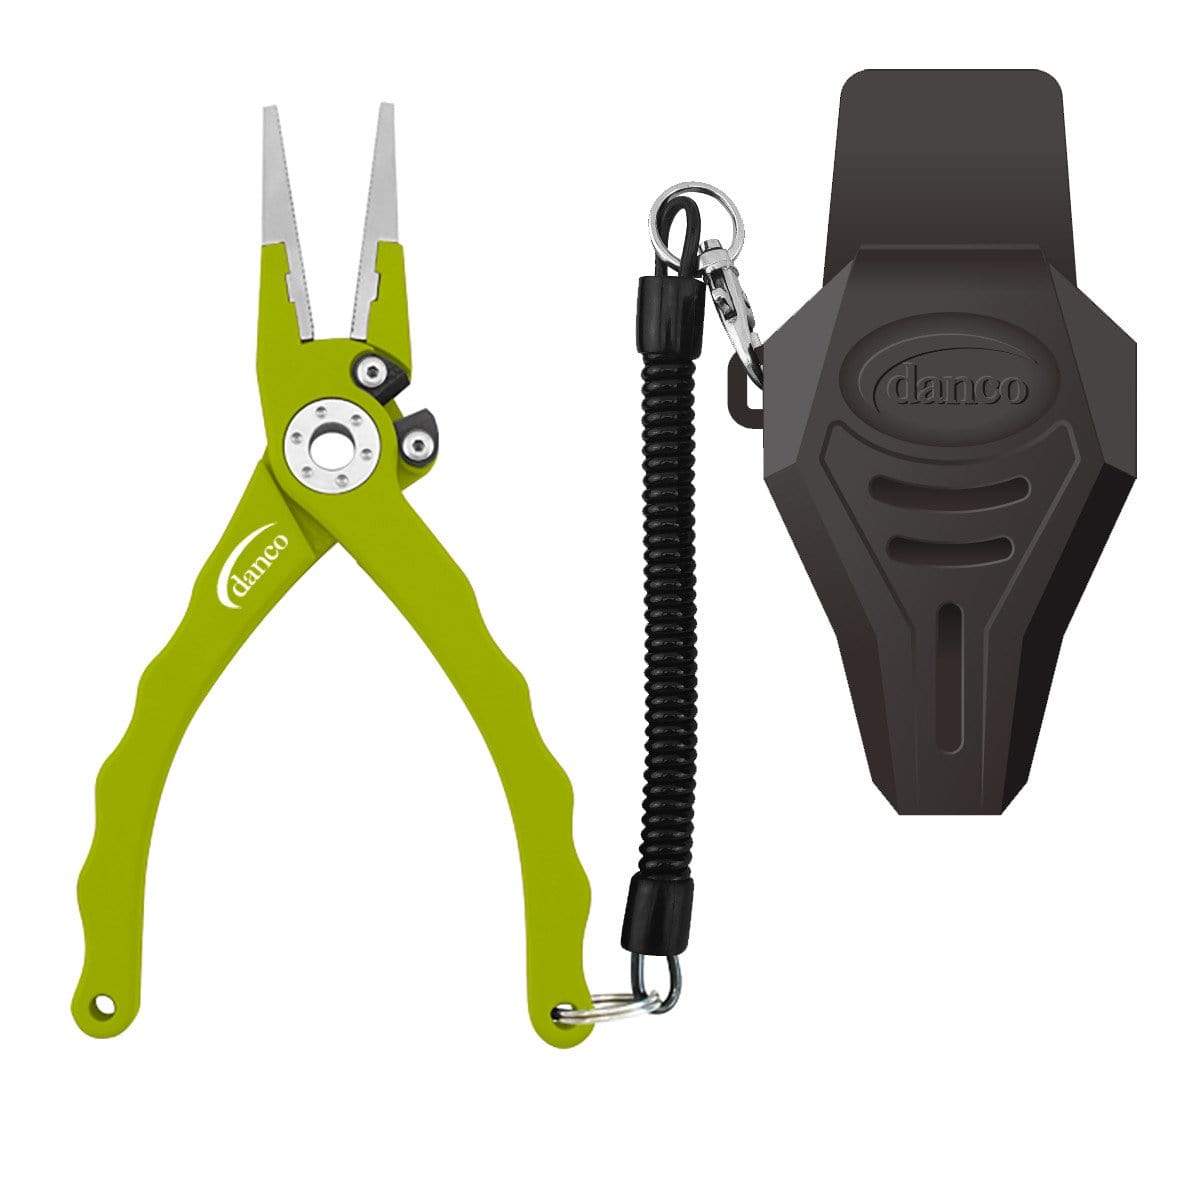 Tides Fishing Pliers Saltwater/Freshwater-Quality Offshore/Inshore  Aluminium